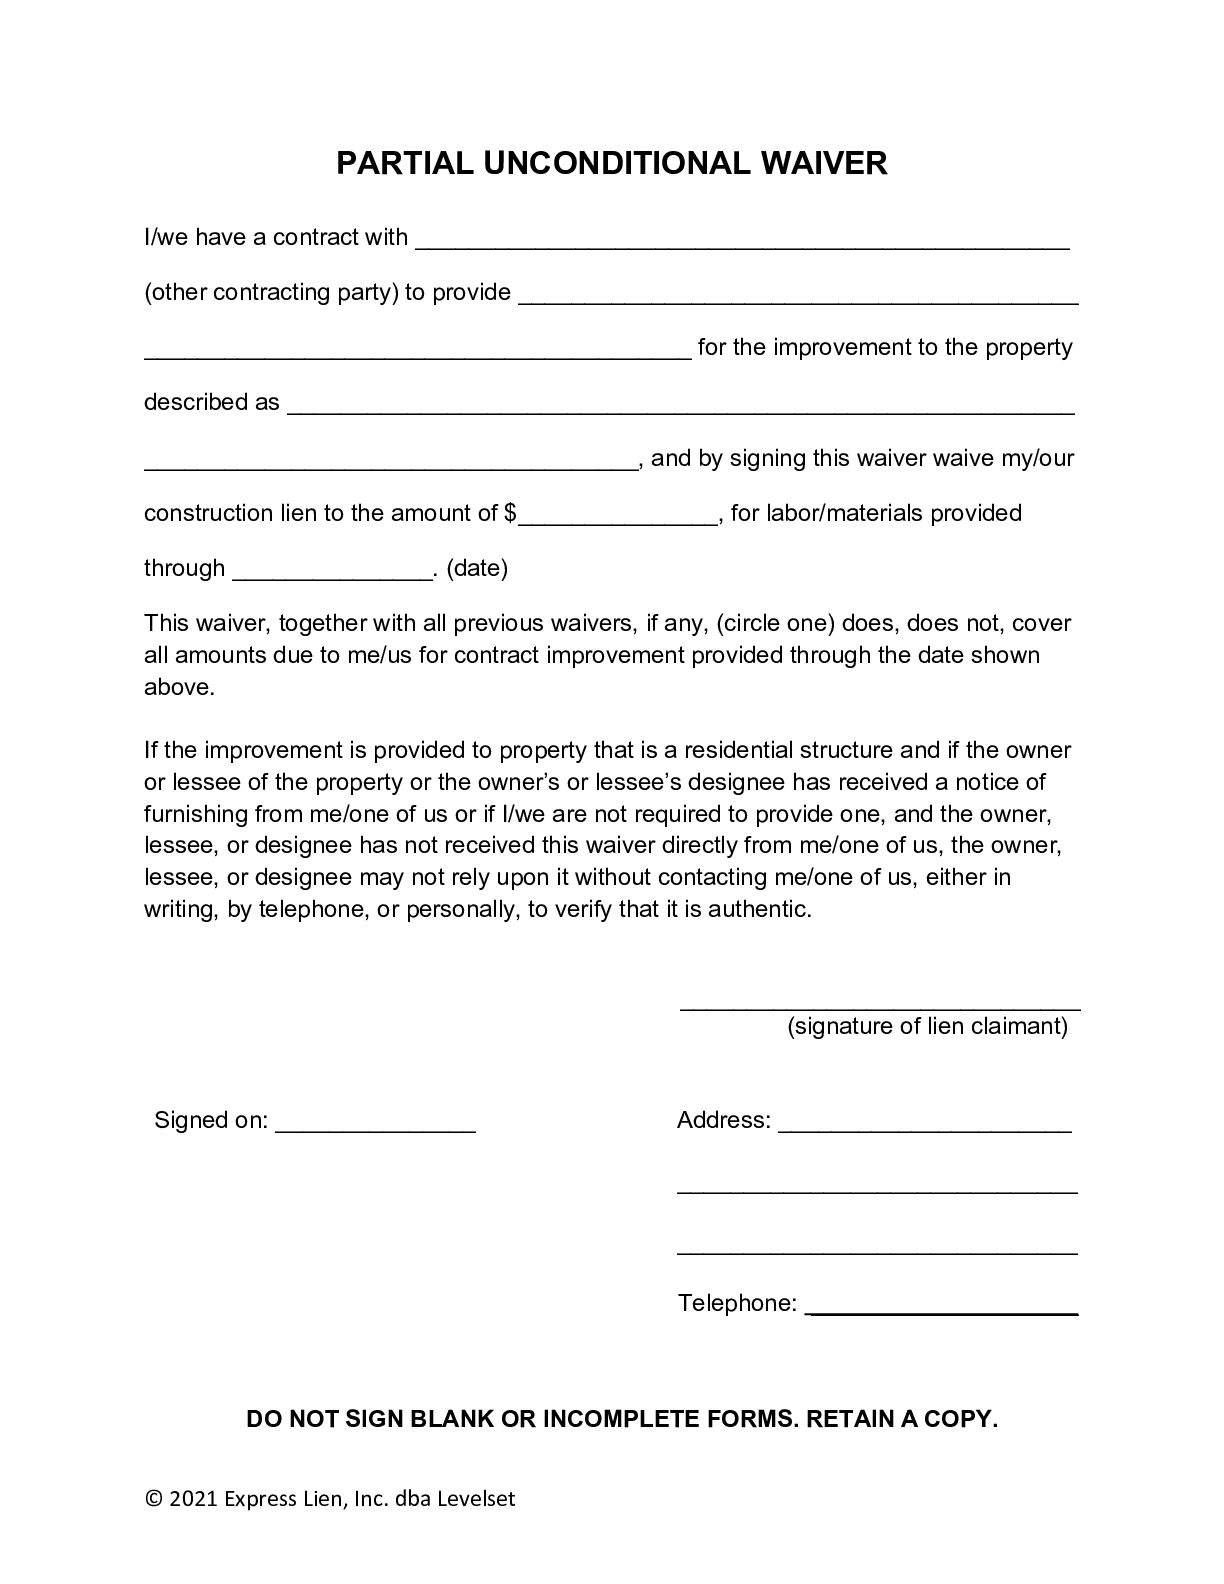 Michigan Partial Unconditional Lien Waiver Form - free from